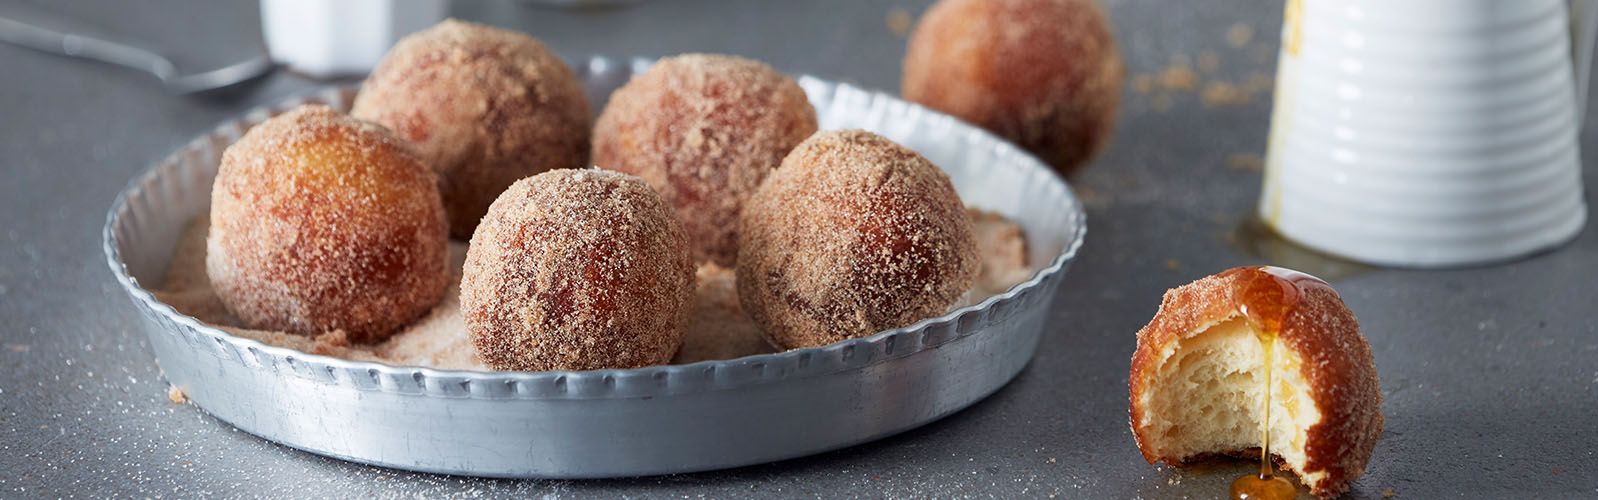 Cinnamon-dusted doughnuts with a caramel apple dipping sauce